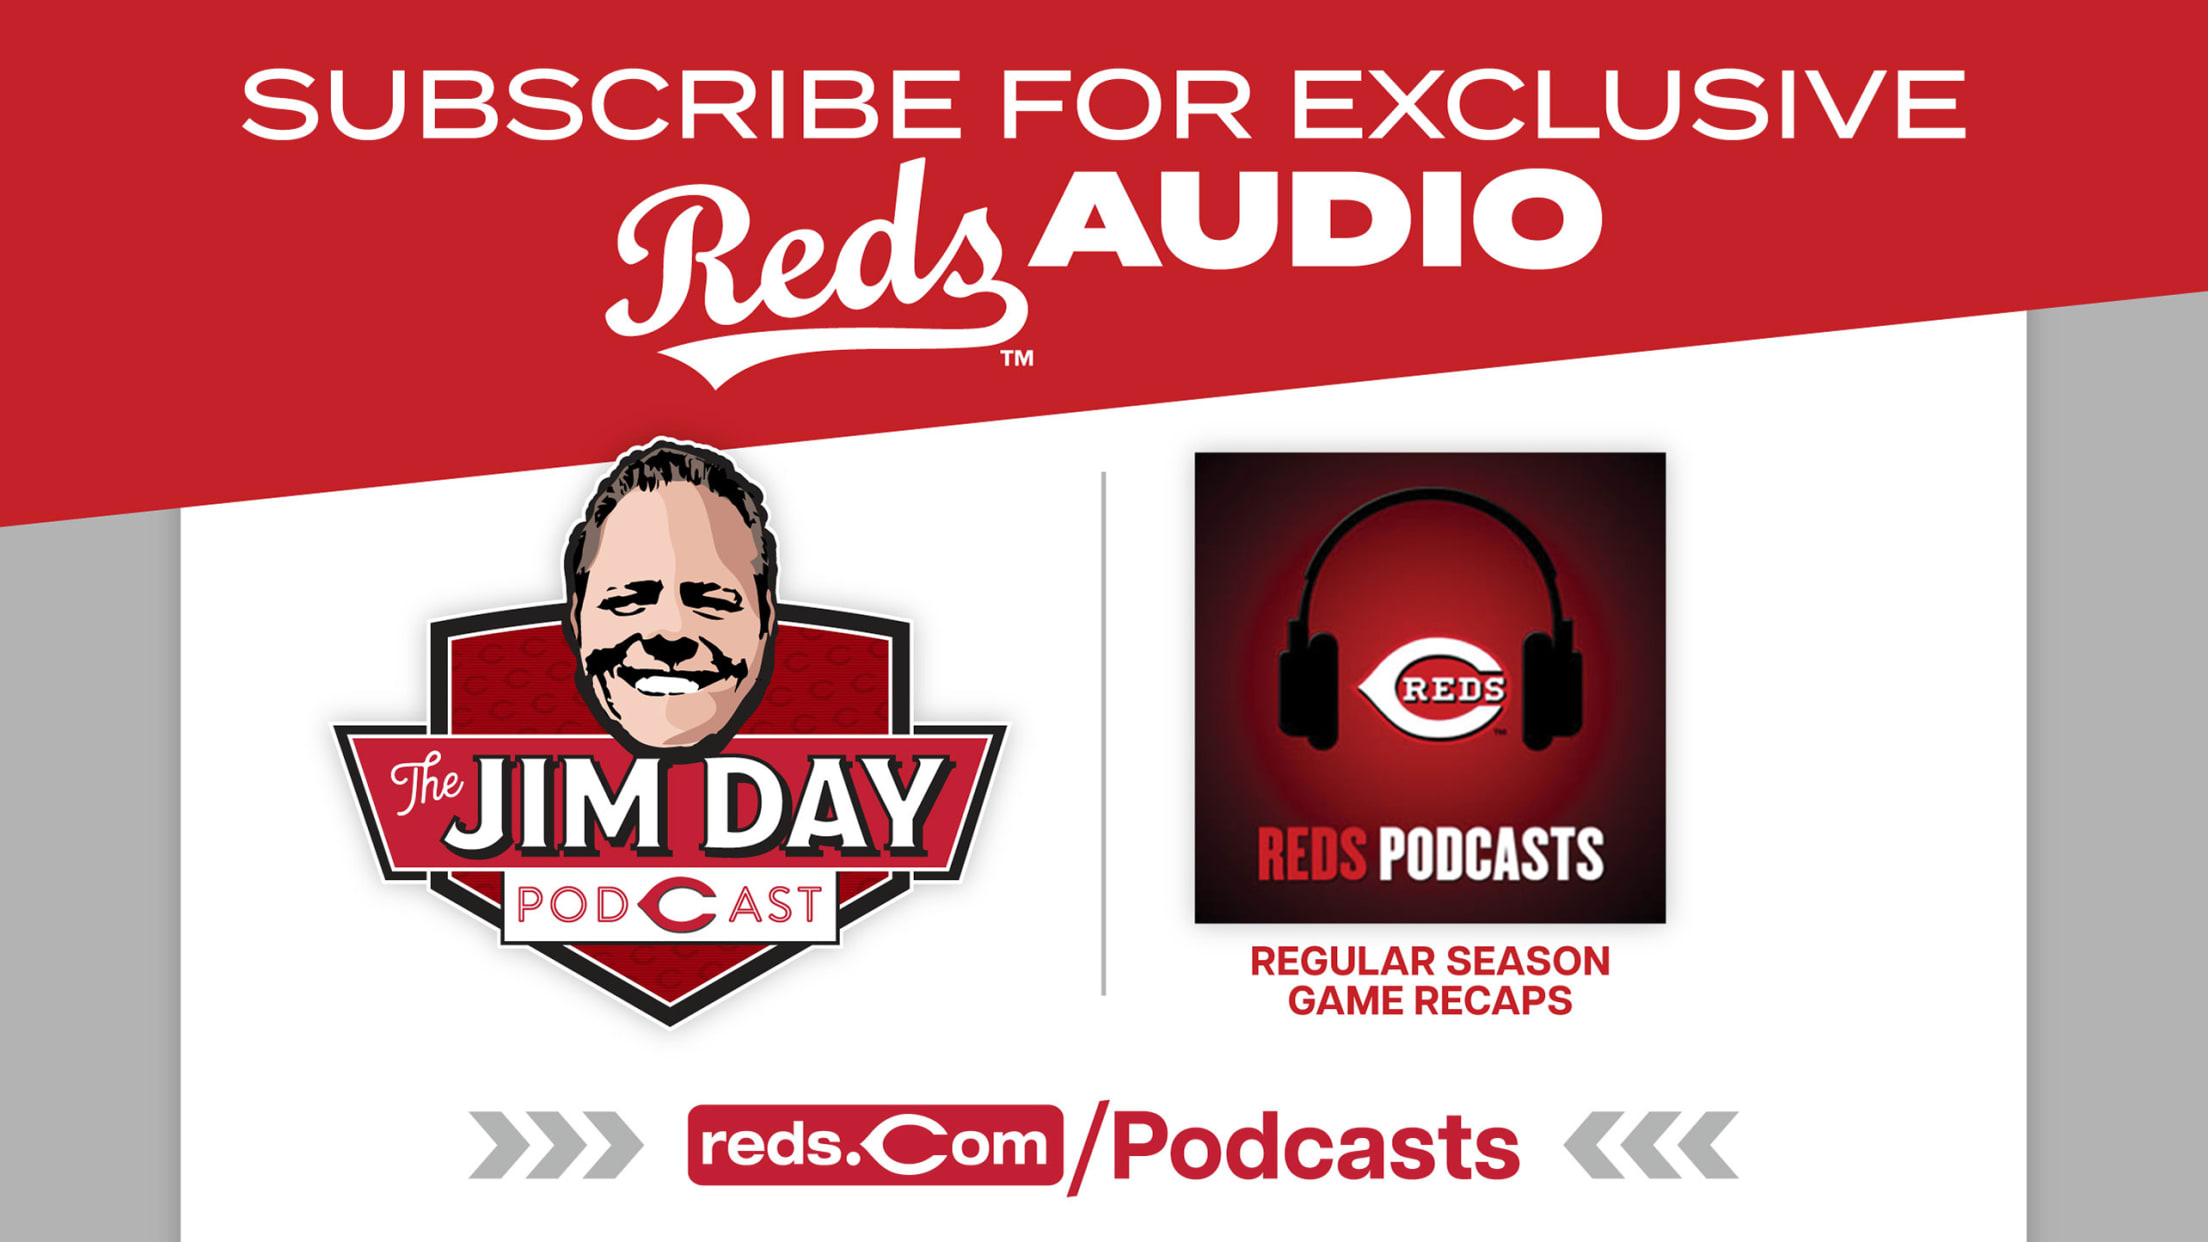 3 early reasons to be excited about the Reds 2022 season